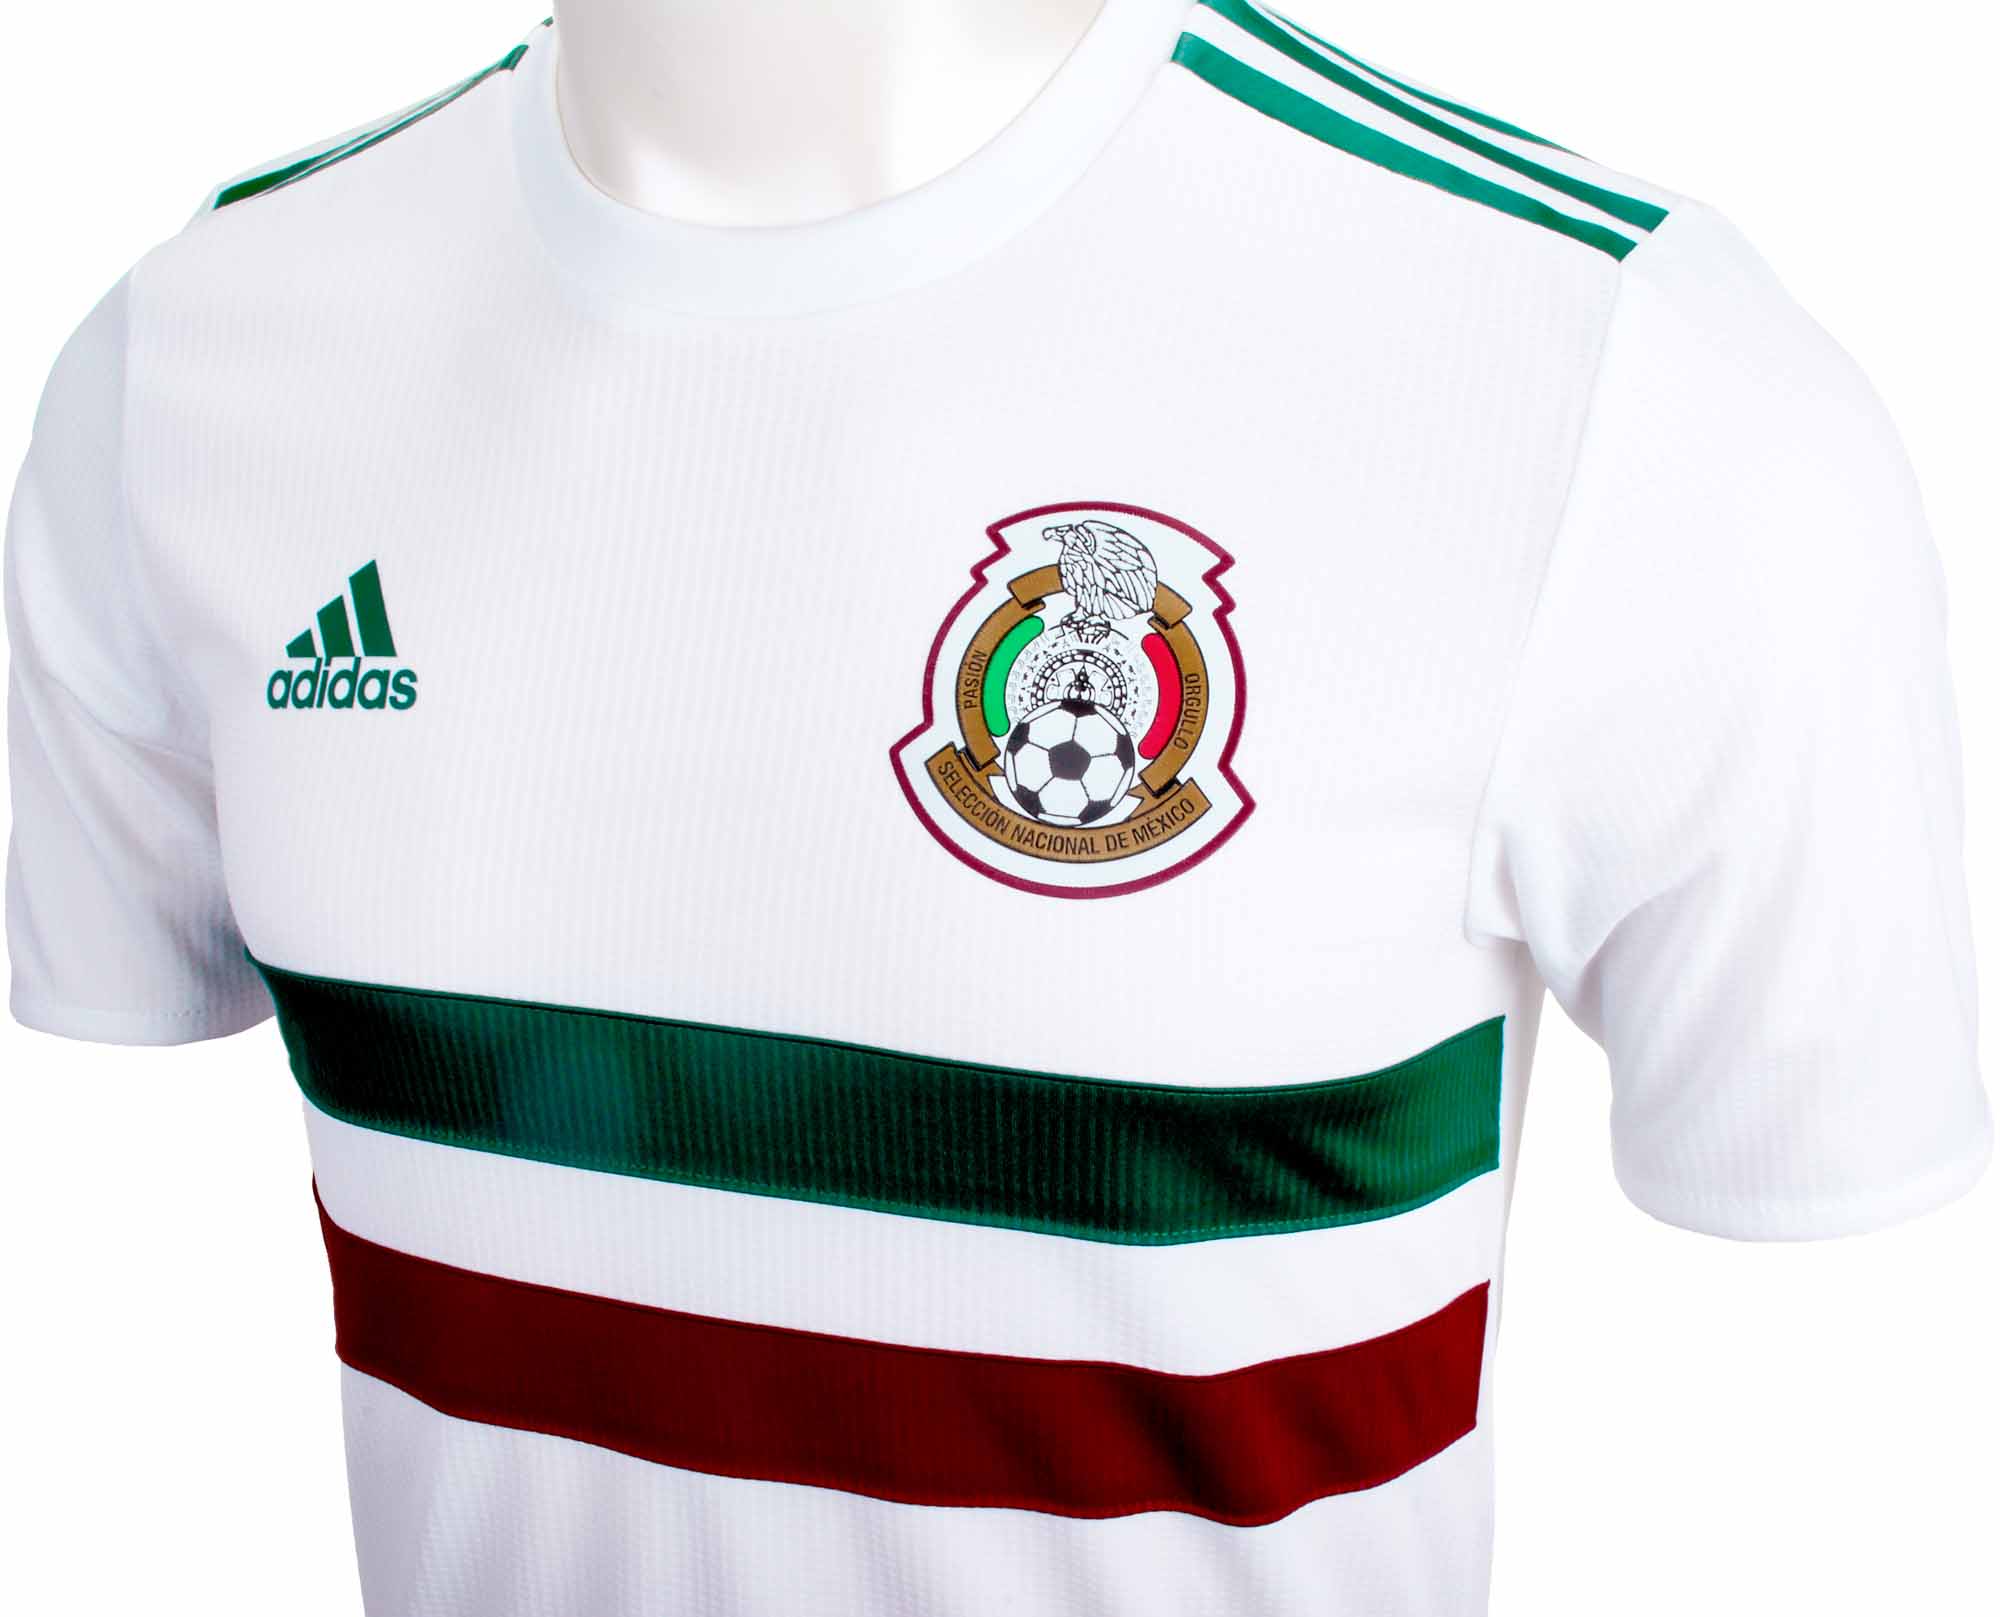 mexico authentic away jersey